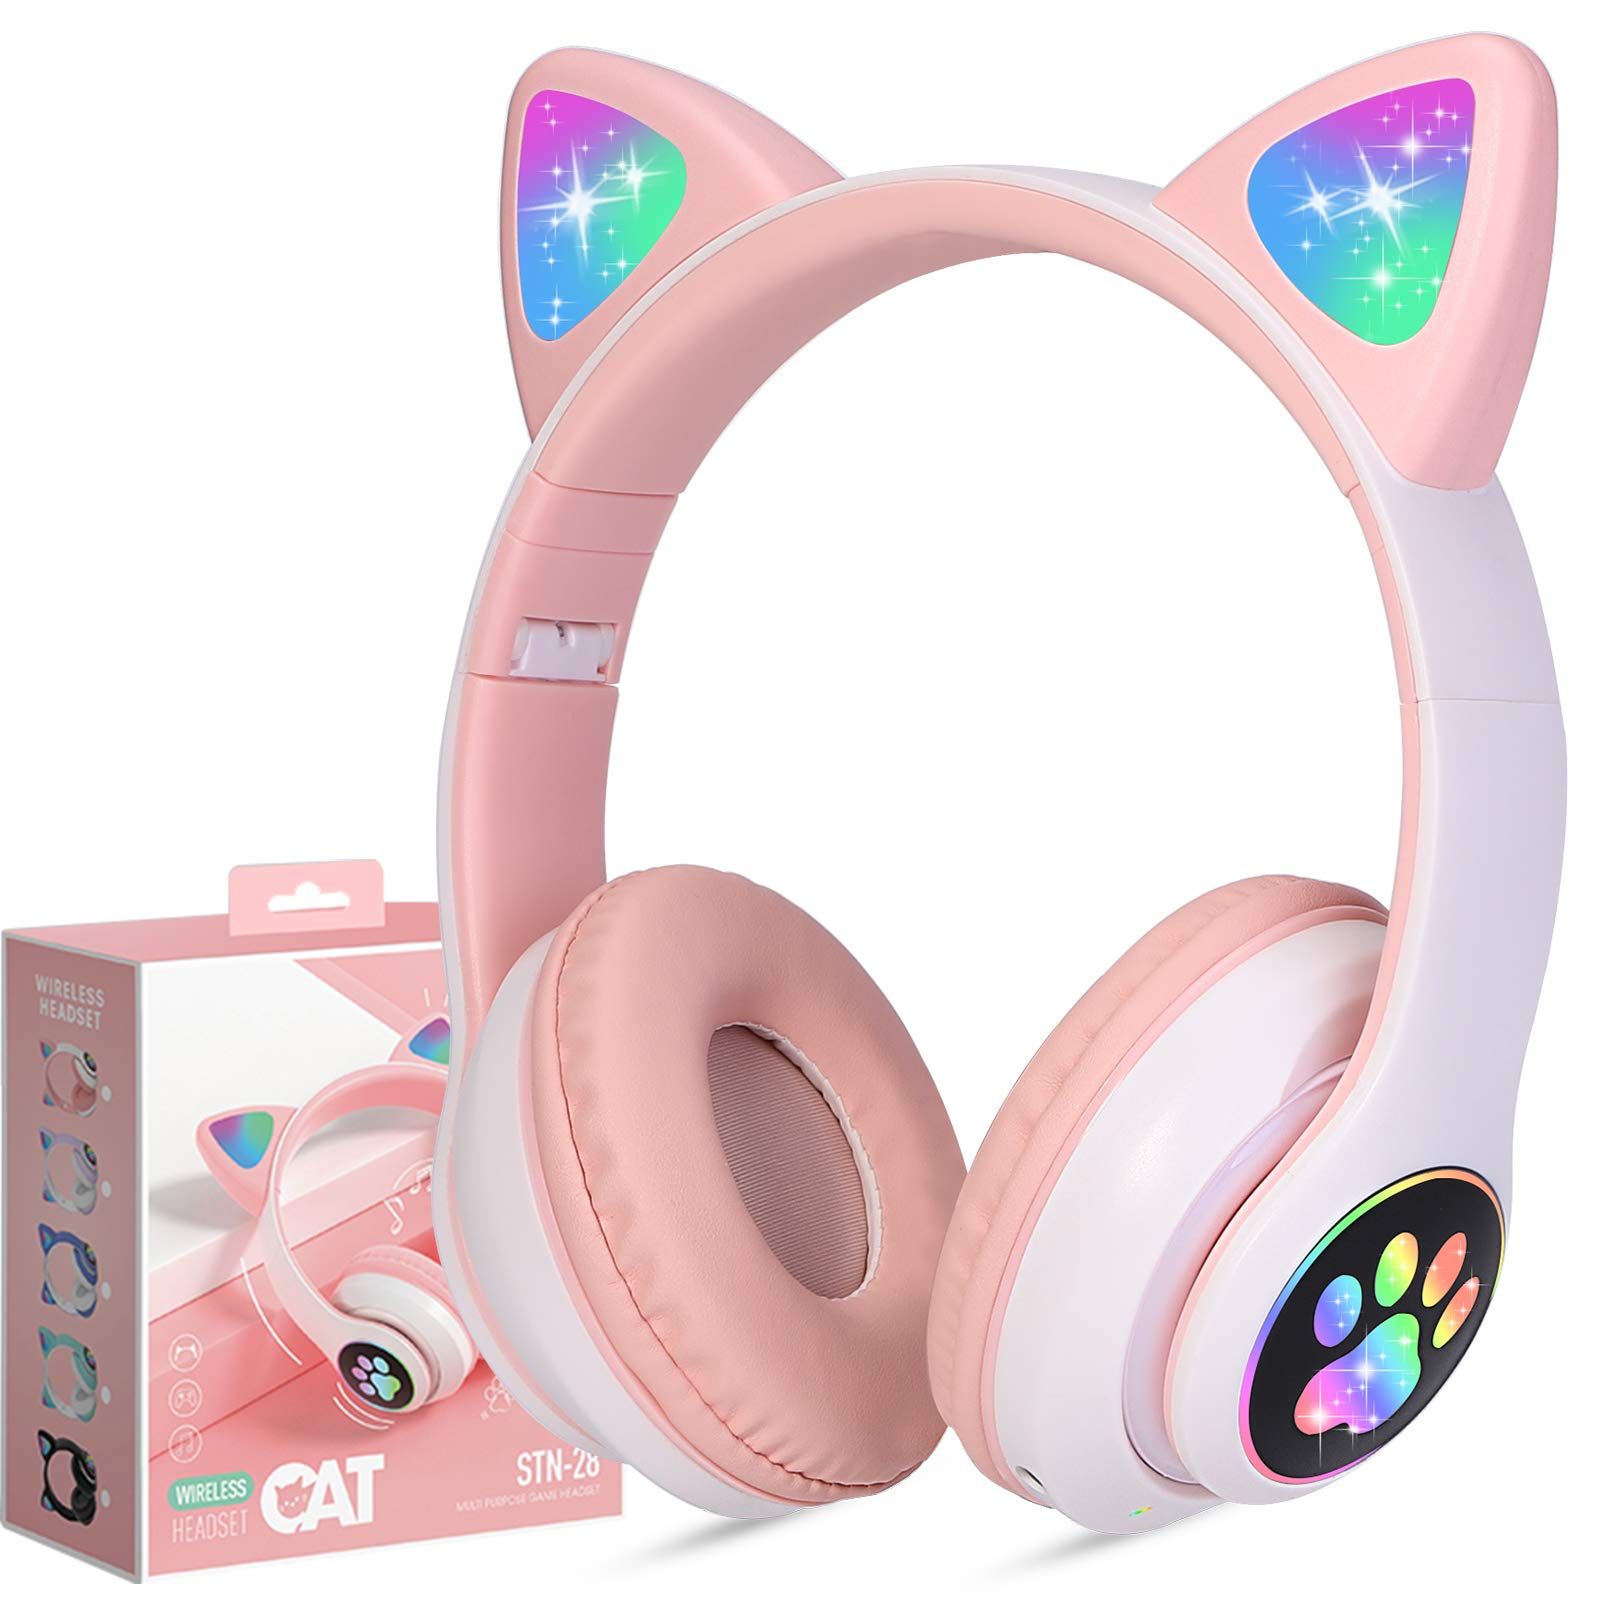 35 Best Gifts for 11-Year-Old Girls in 2023